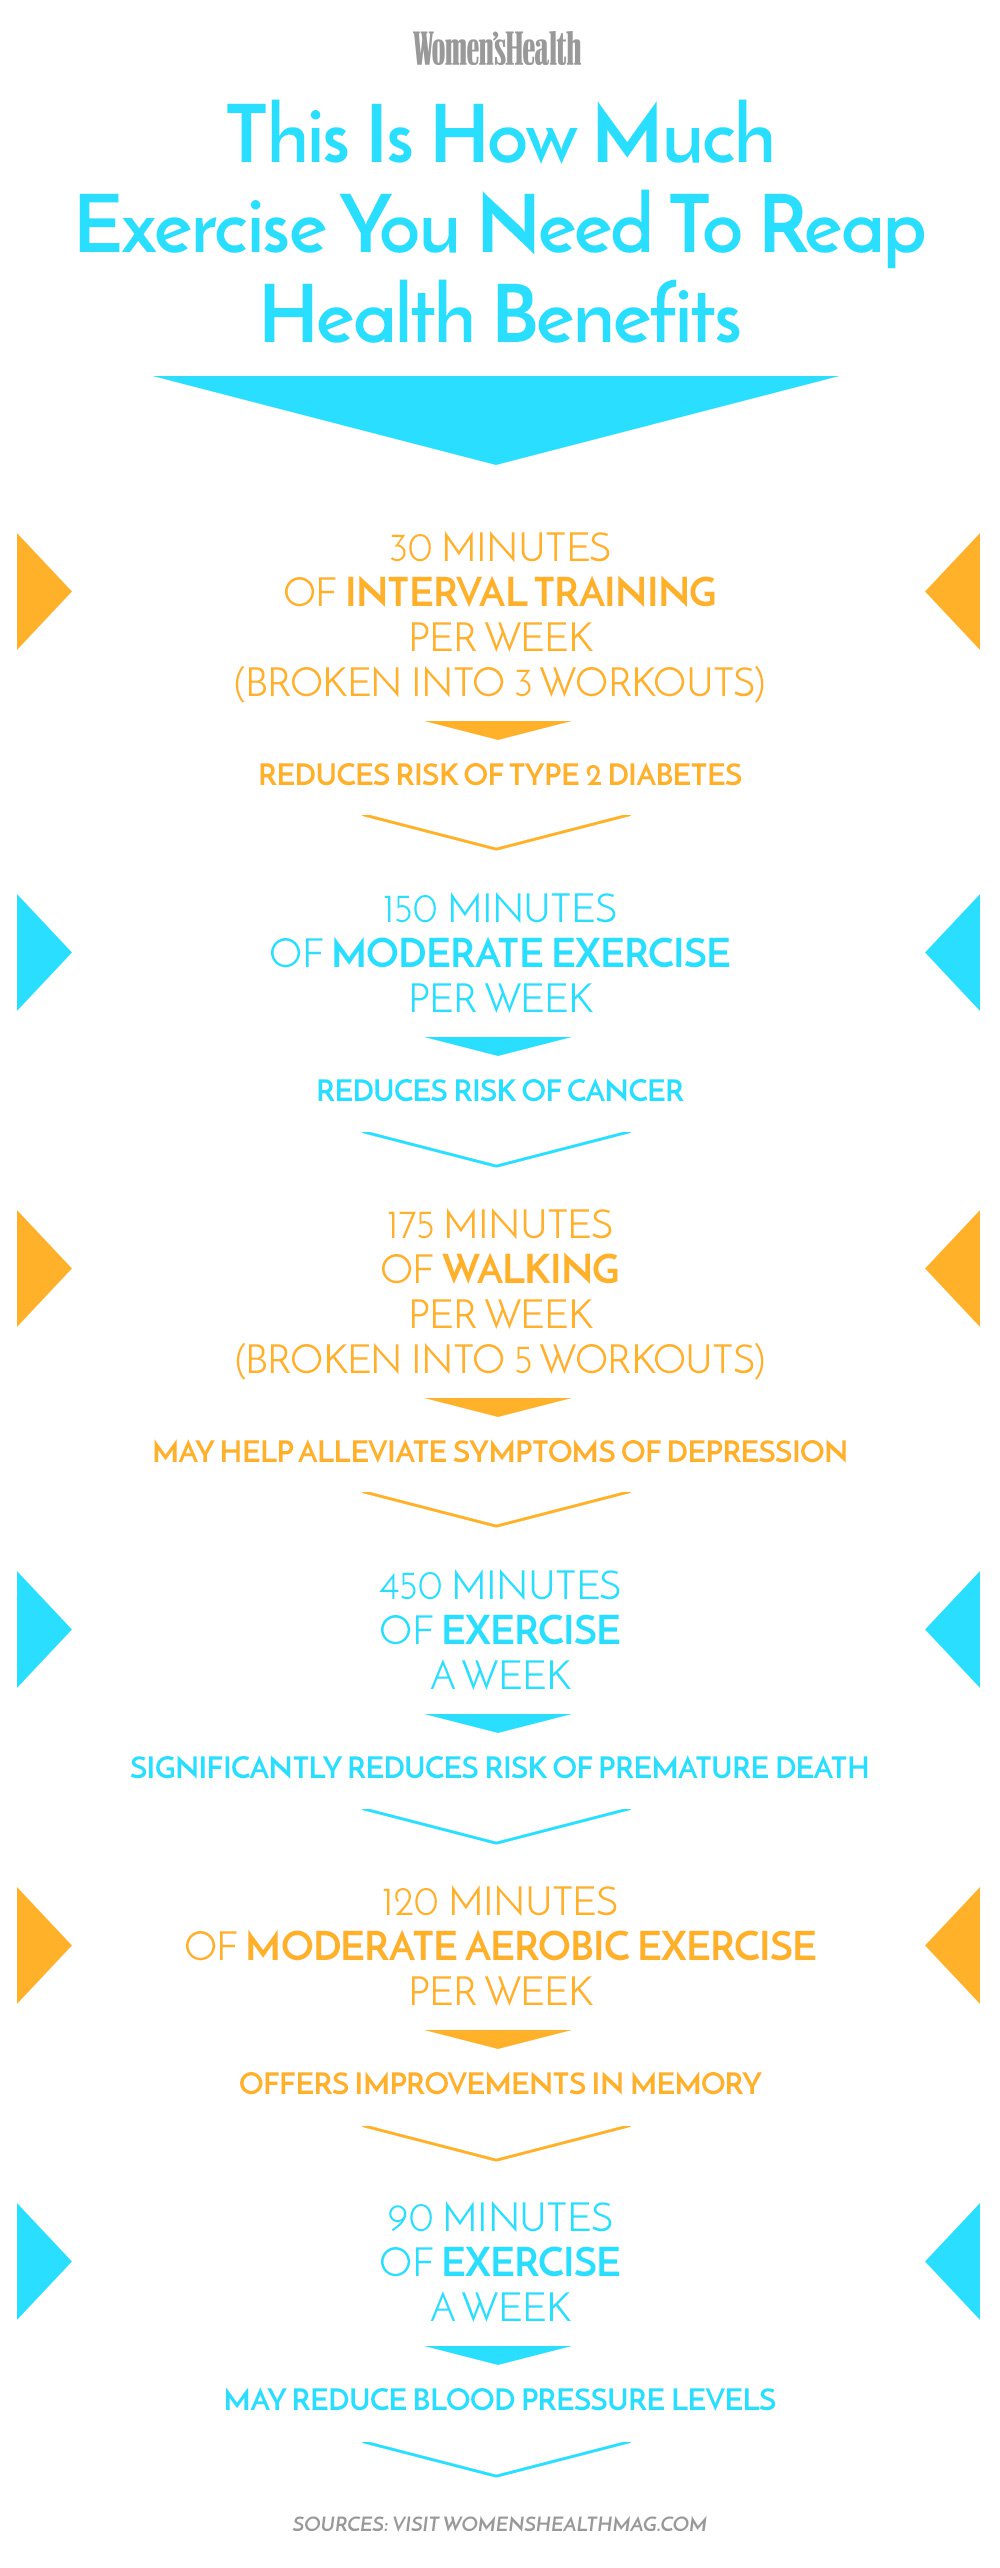 This-is-how-much-exercise-you-need-to-do-to-reap-health-benefits-graphic2